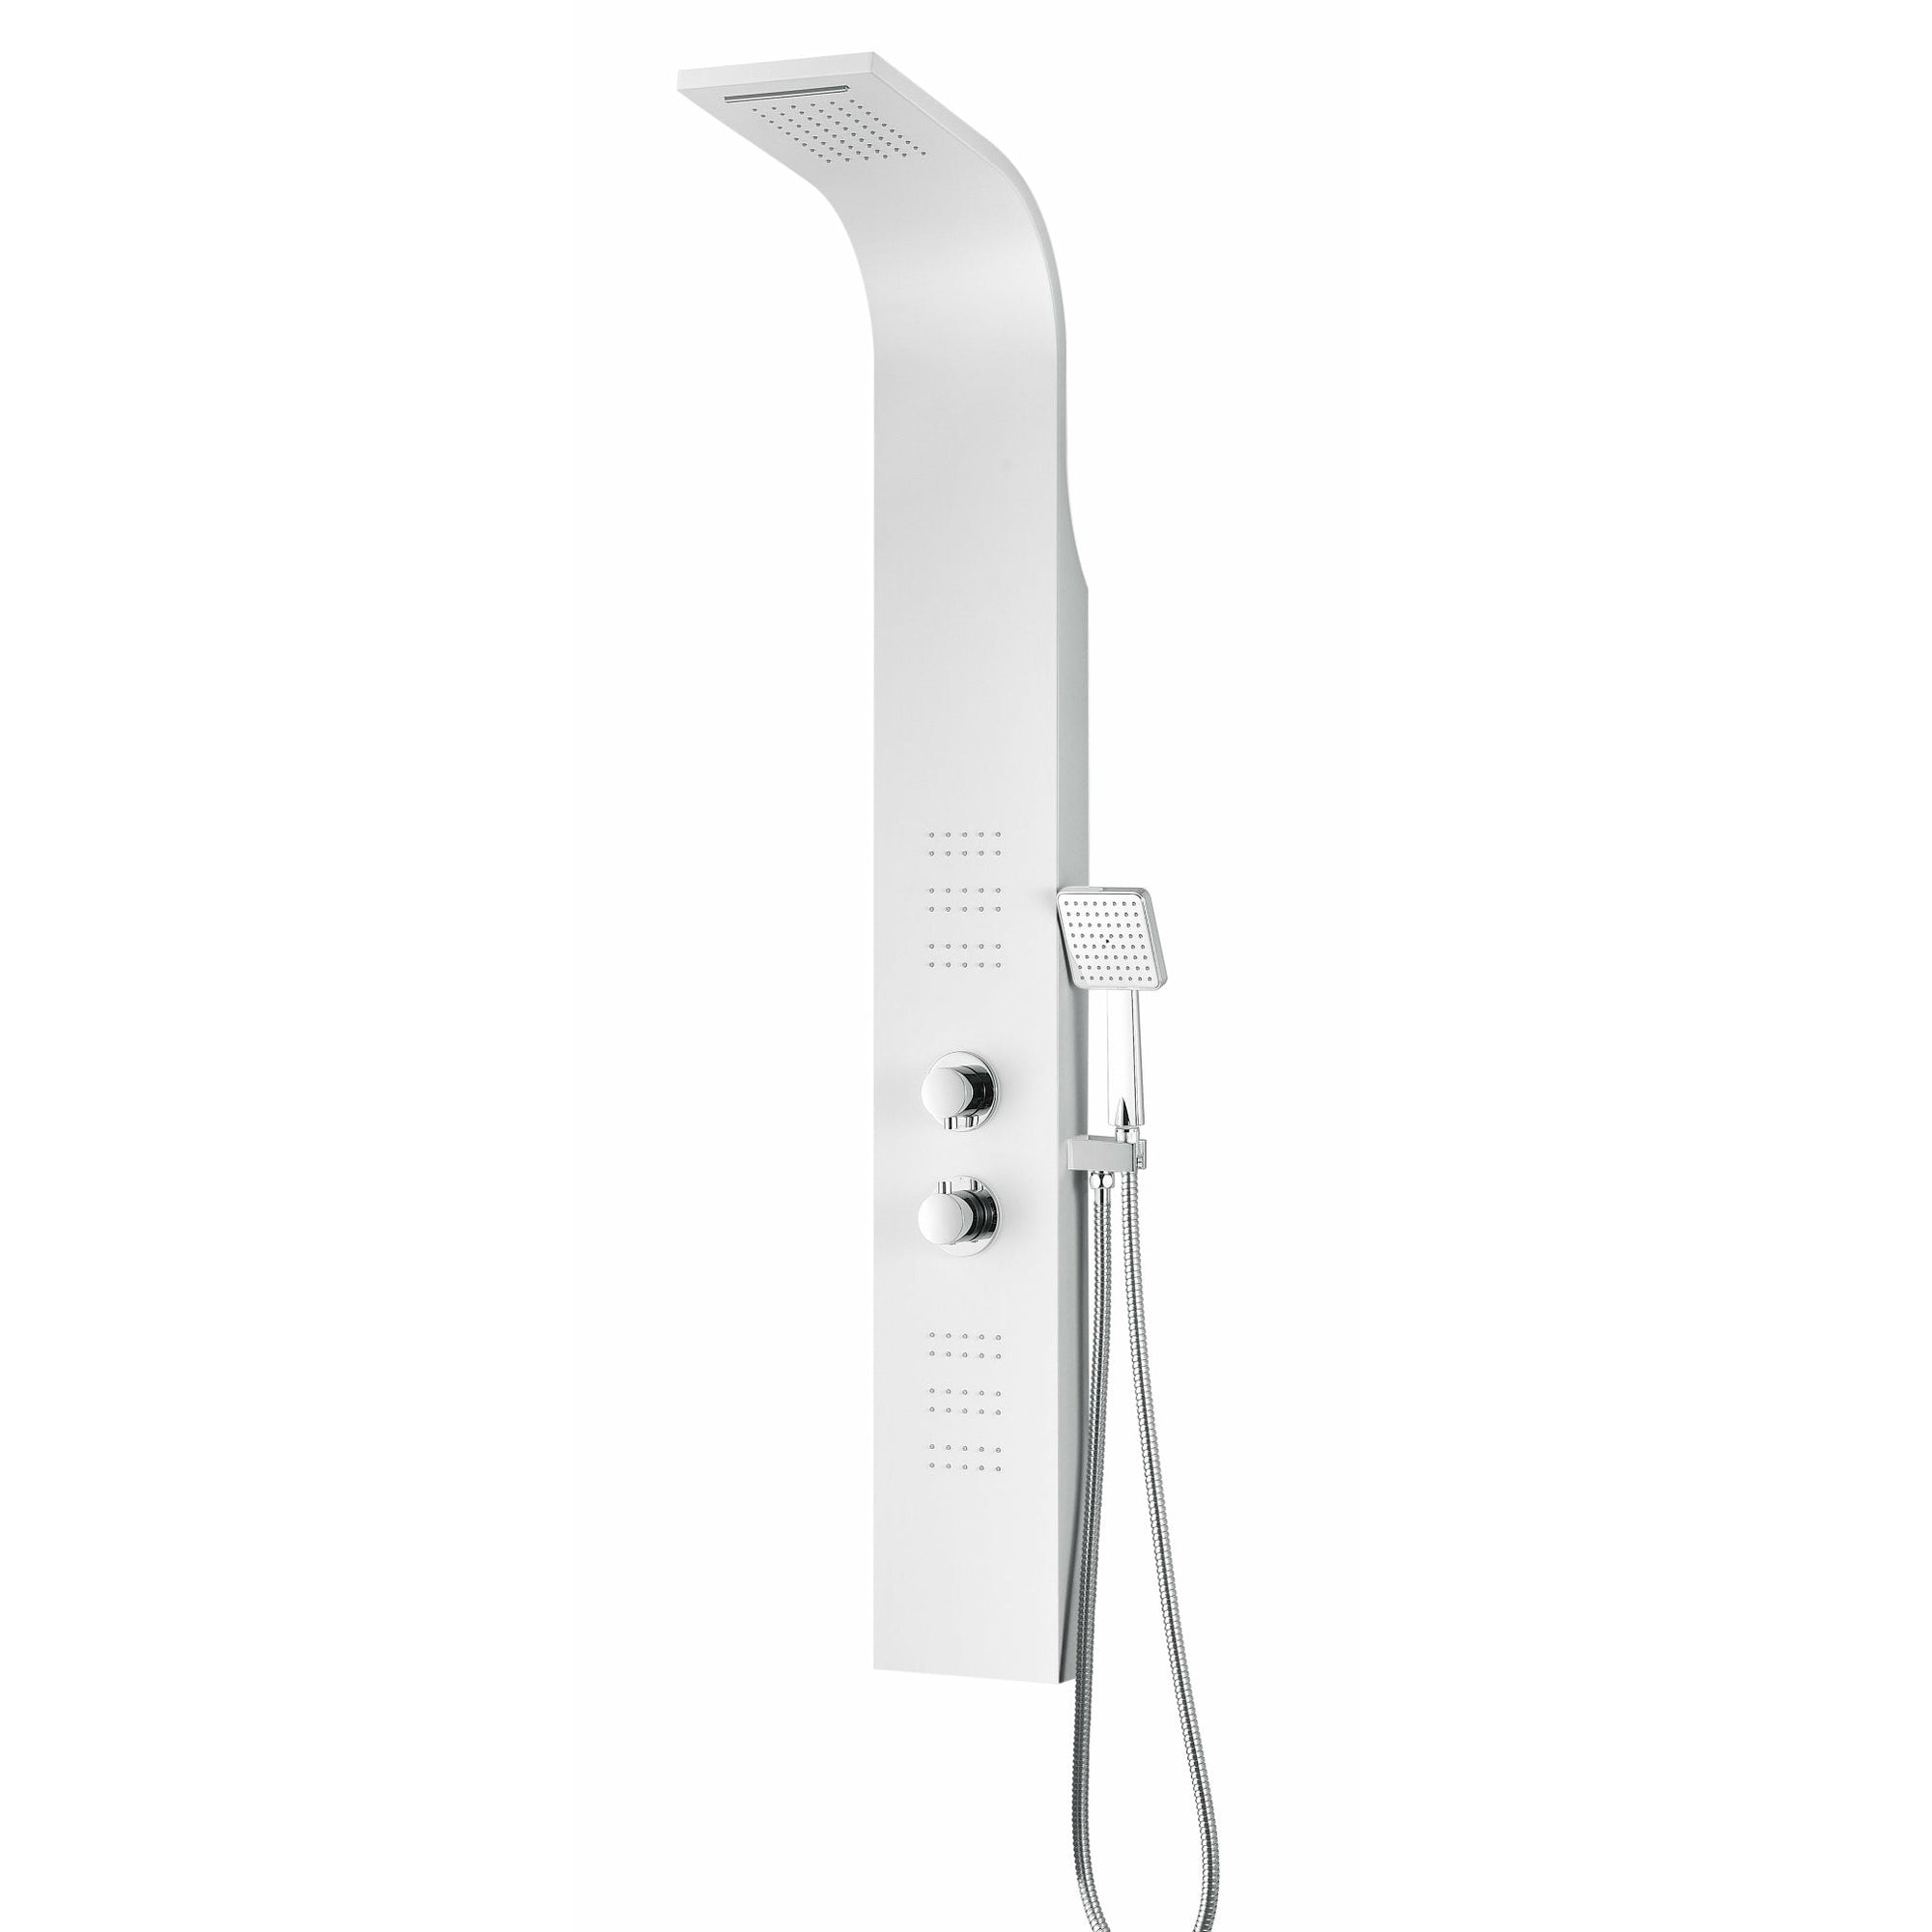 Anzzi Arena Series 60 Inch Full Body Shower Panel with Fixed Crested Heavy Rain Shower Head, Two Shower Control Knobs, Two Acu-stream Vector Massage Body Jet Sets and Euro-grip Hand Sprayer SP-AZ055 - Vital Hydrotherapy